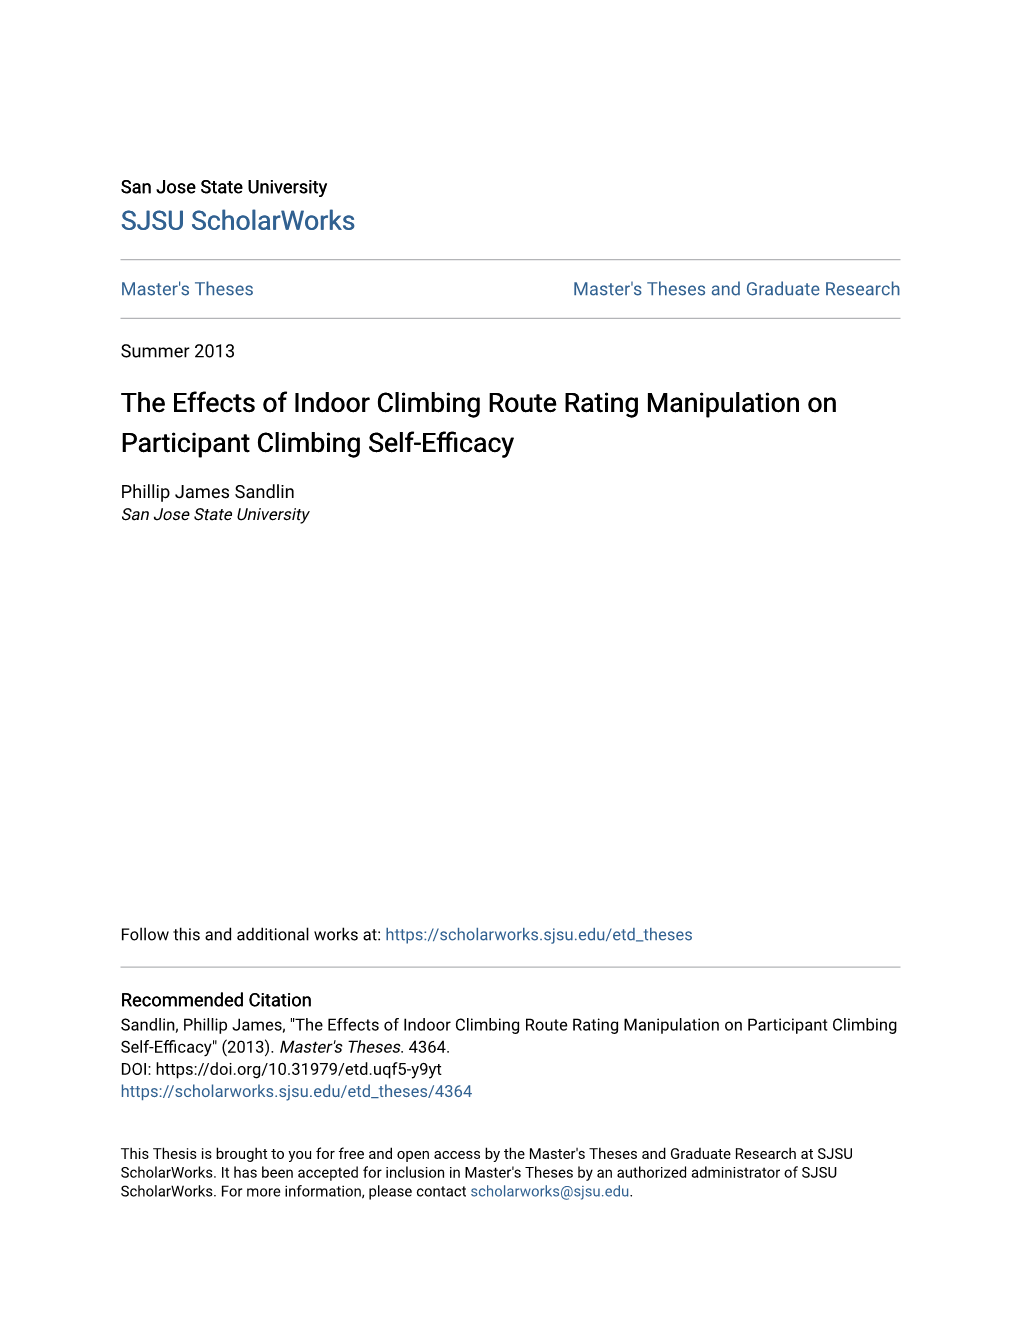 The Effects of Indoor Climbing Route Rating Manipulation on Participant Climbing Self-Efficacy